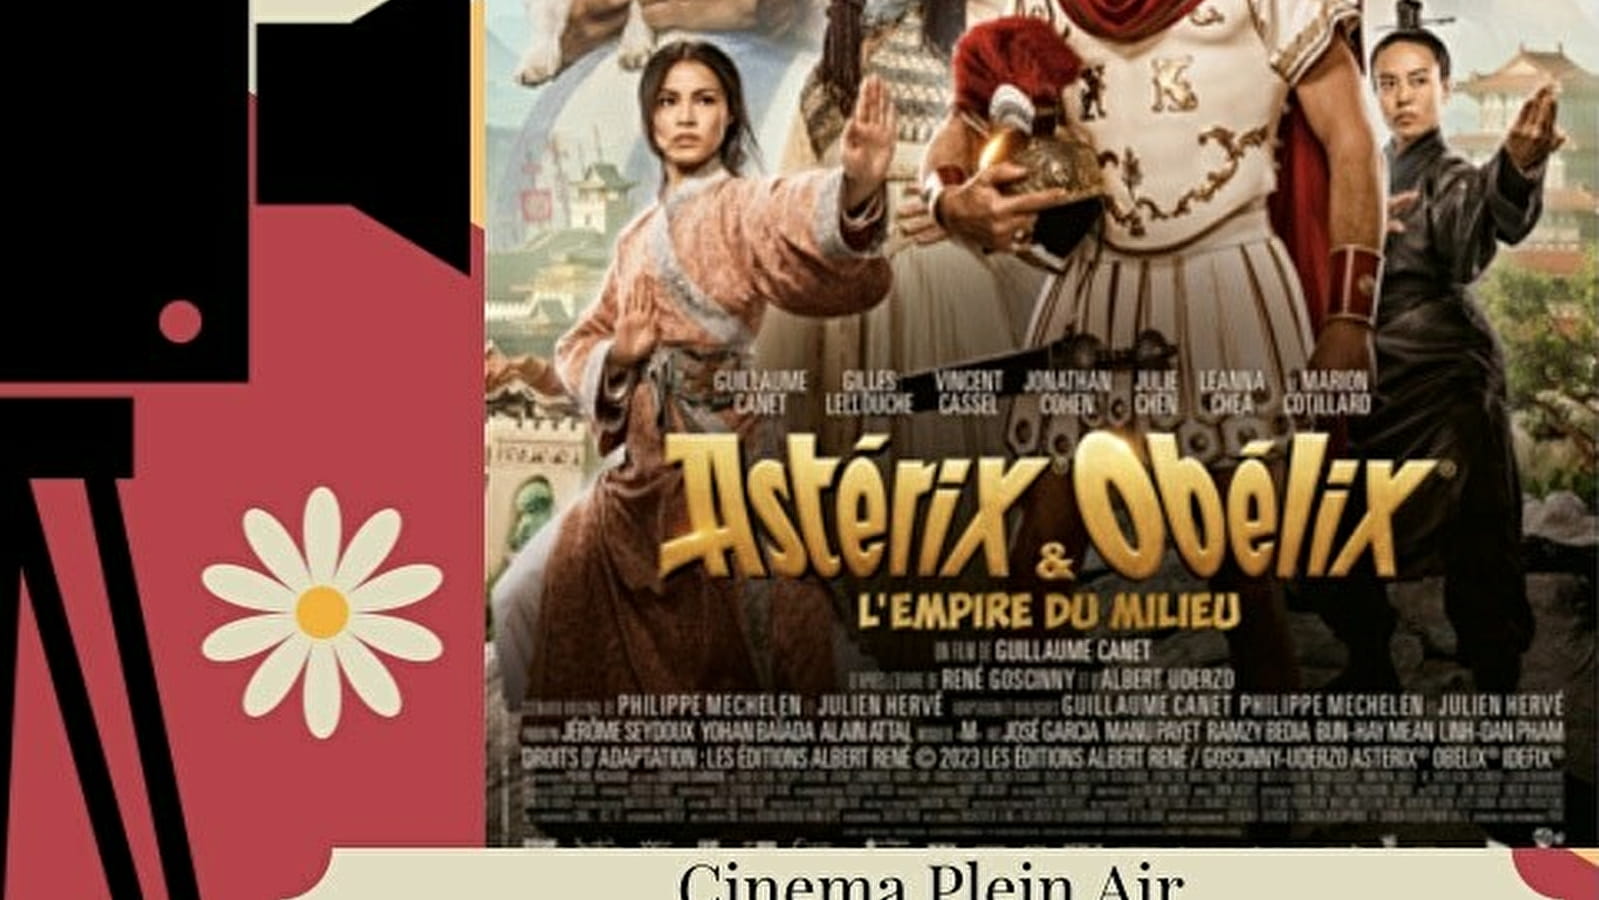 Open air cinema - Asterix and Obelix and the Middle Kingdom